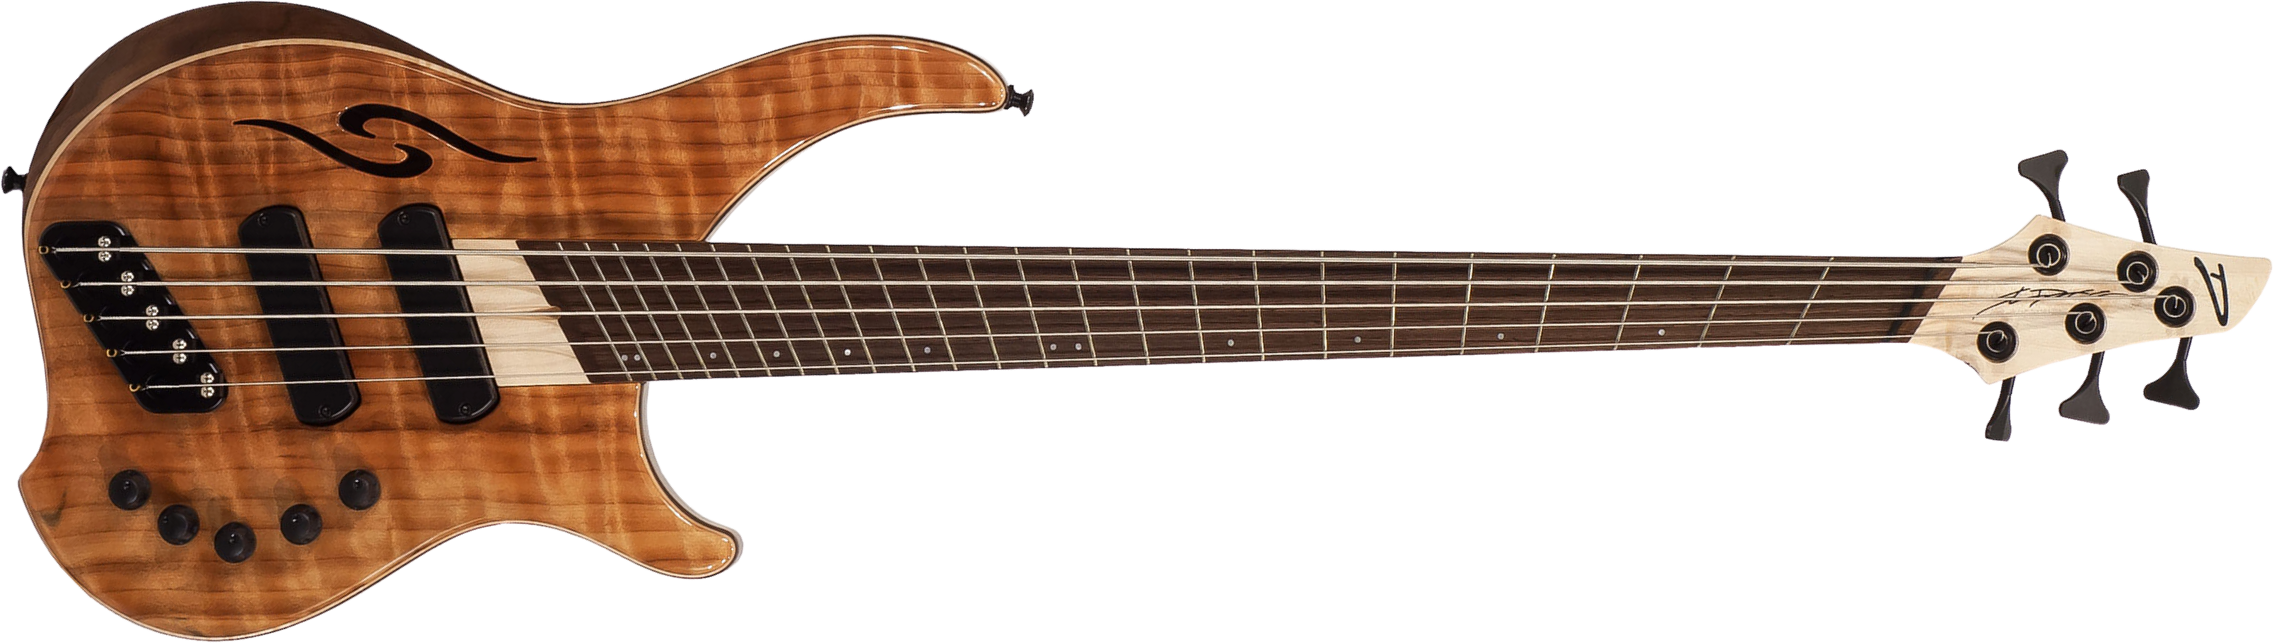 Dingwall Afterburner Ii 5 2-pickups Wen +housse - Natural - Solid body electric bass - Main picture